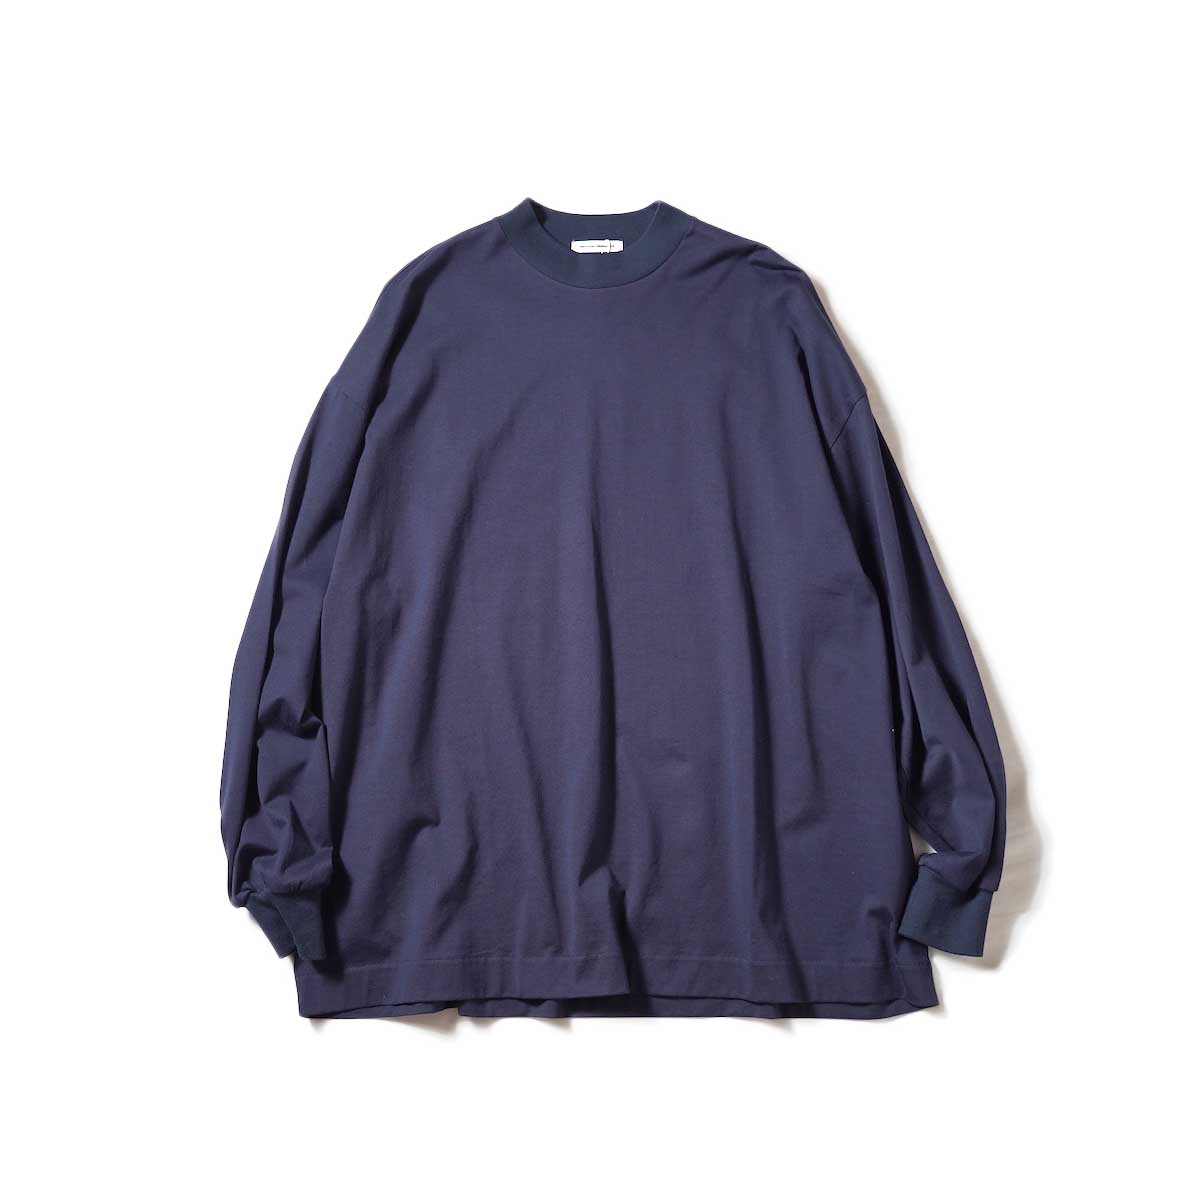 UNIVERSAL PRODUCTS / MOCK NECK L/S T-SHIRT (Navy)